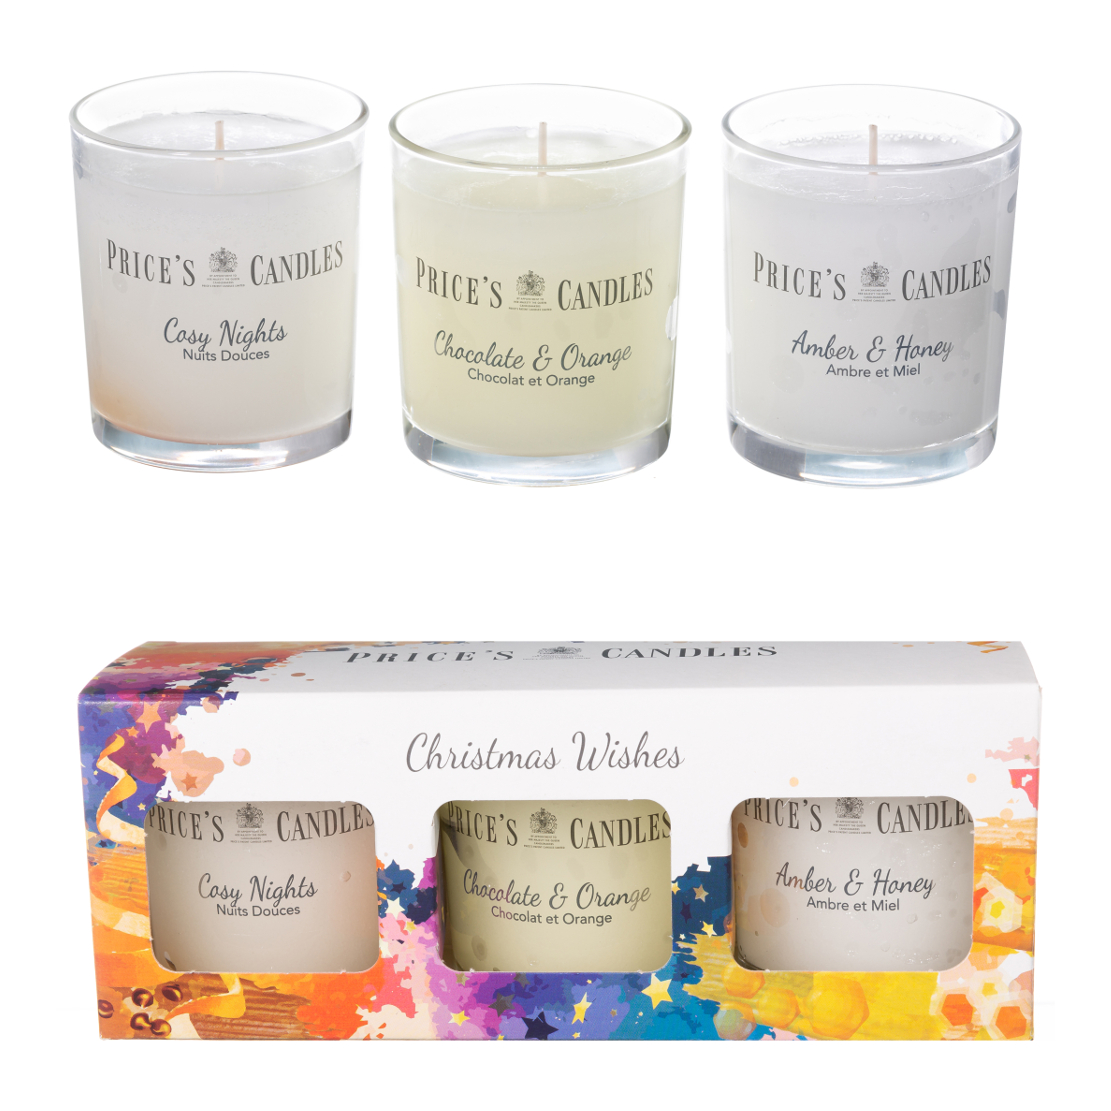 Prices Candles Christmas Wishes Gift Set